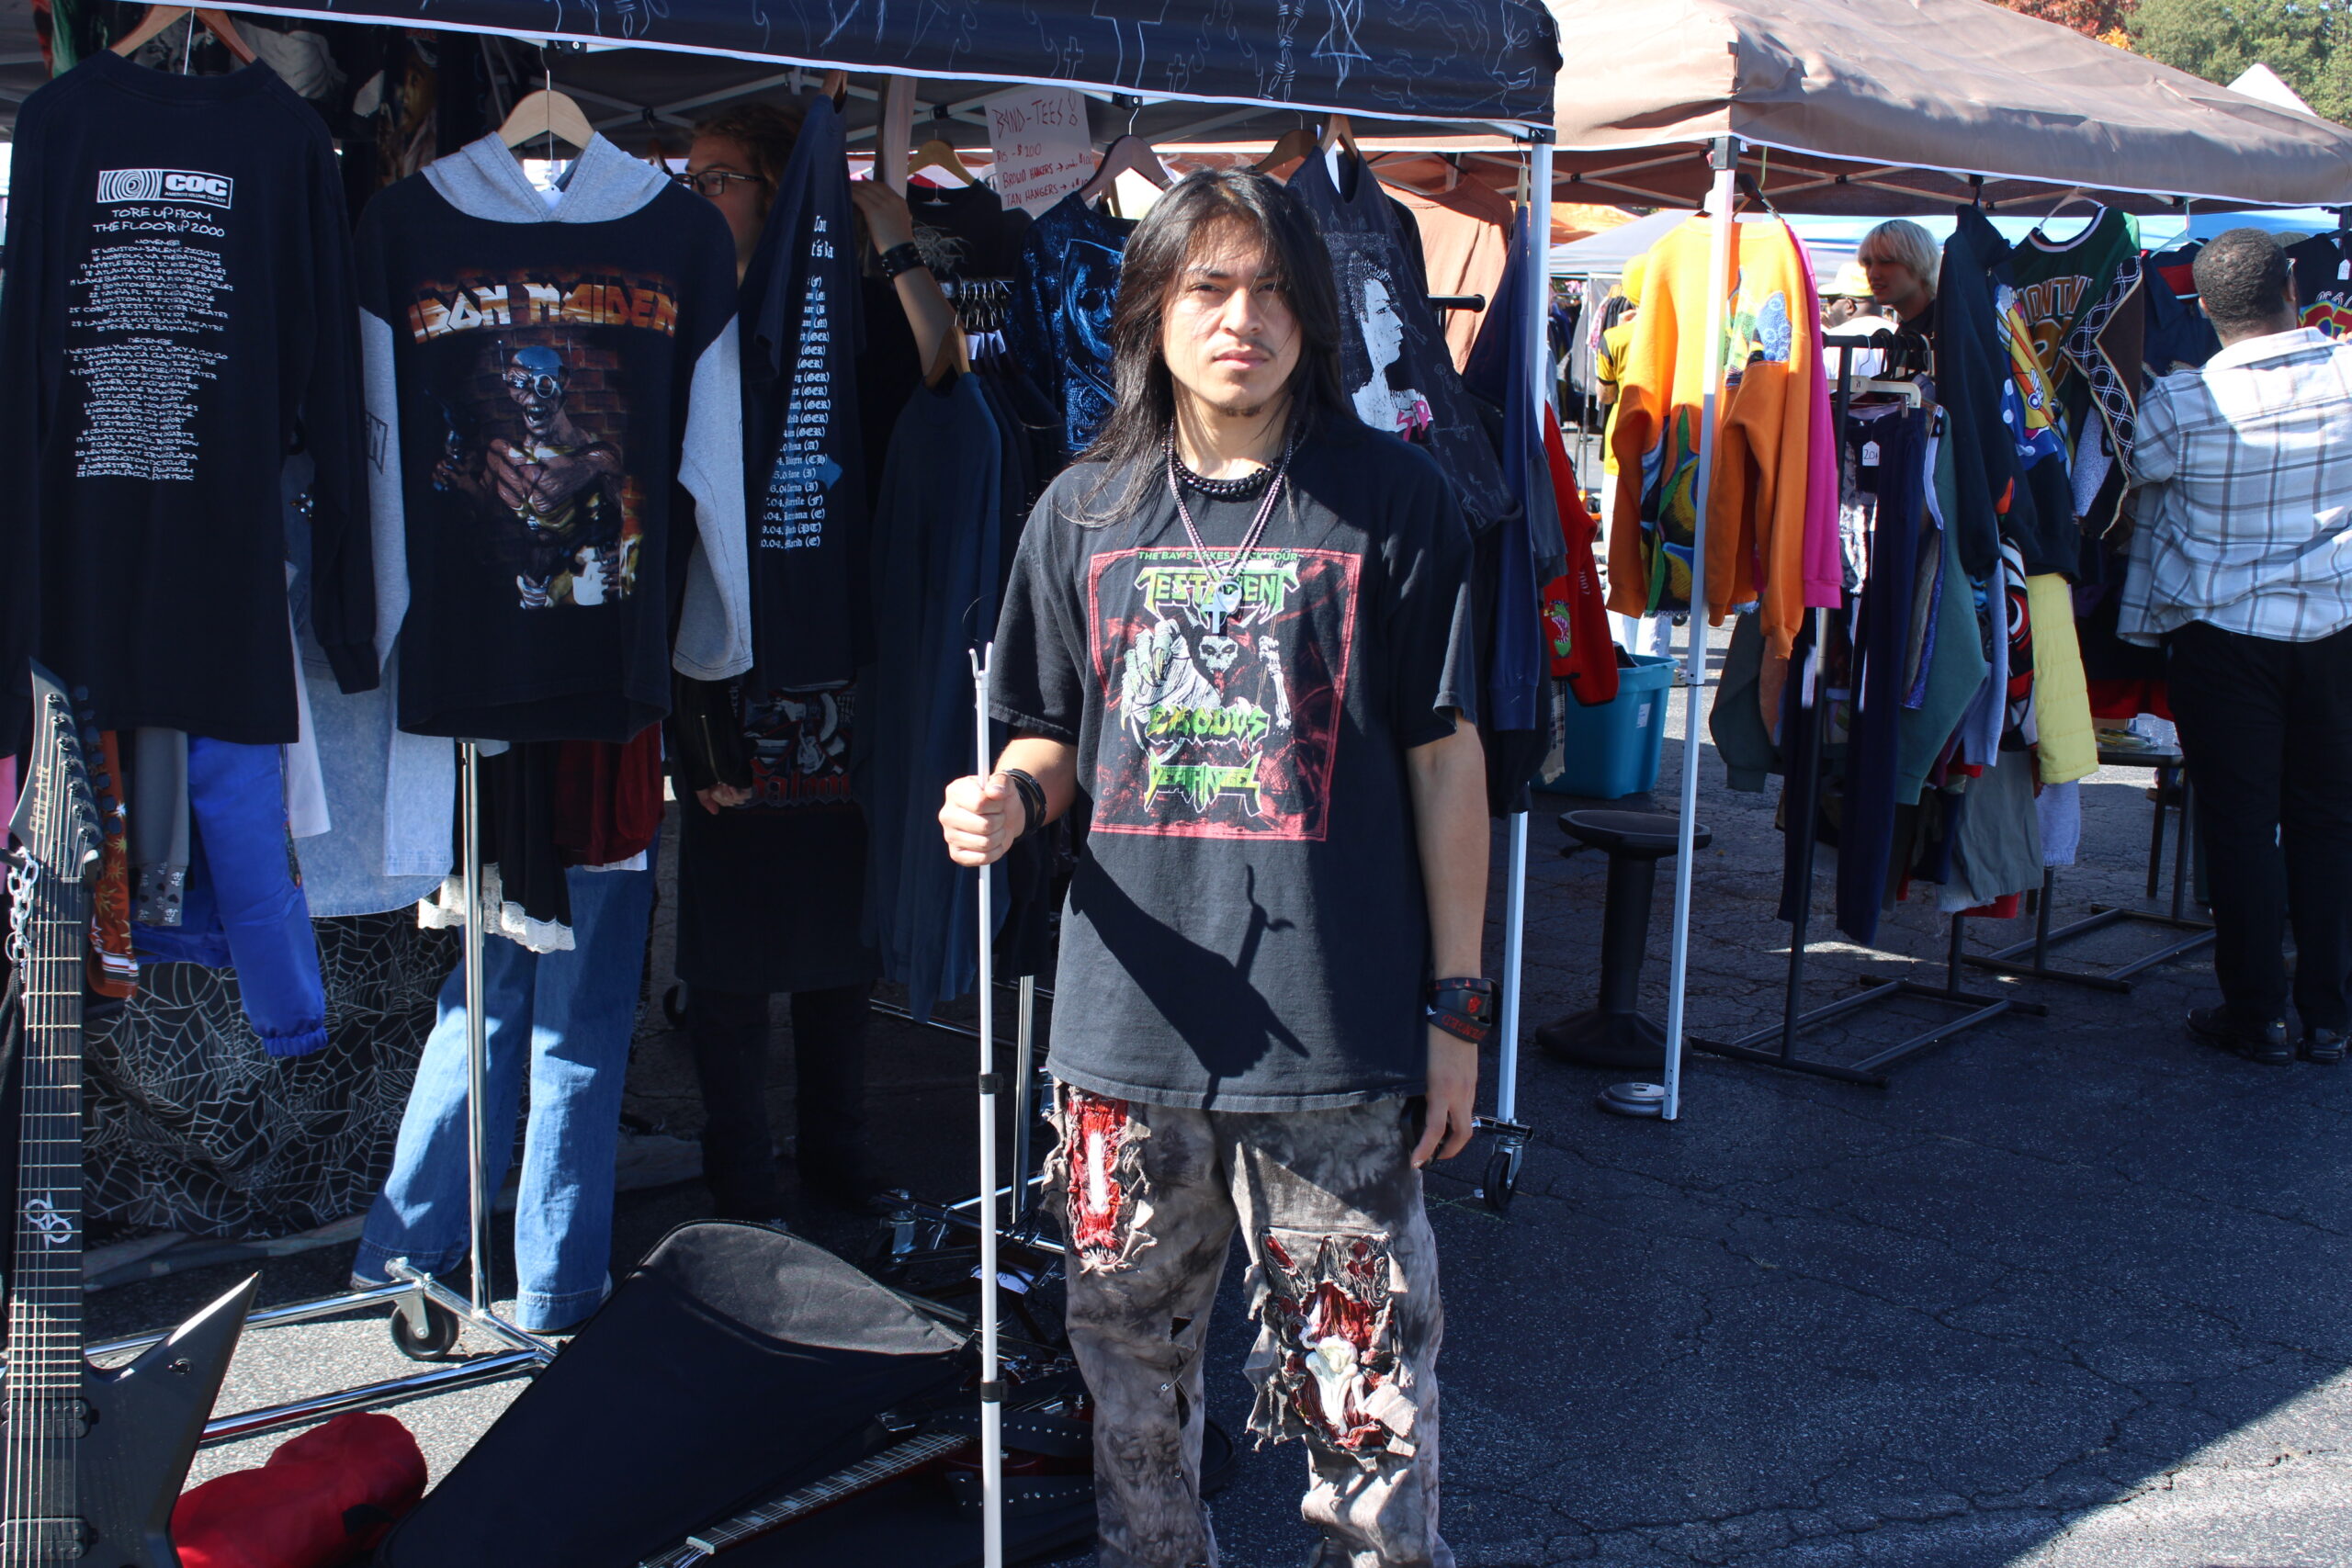 Clothing reseller Rubin Liggin, owner of Dismembered Threads, at his booth at the Ecologie Fall Festival.